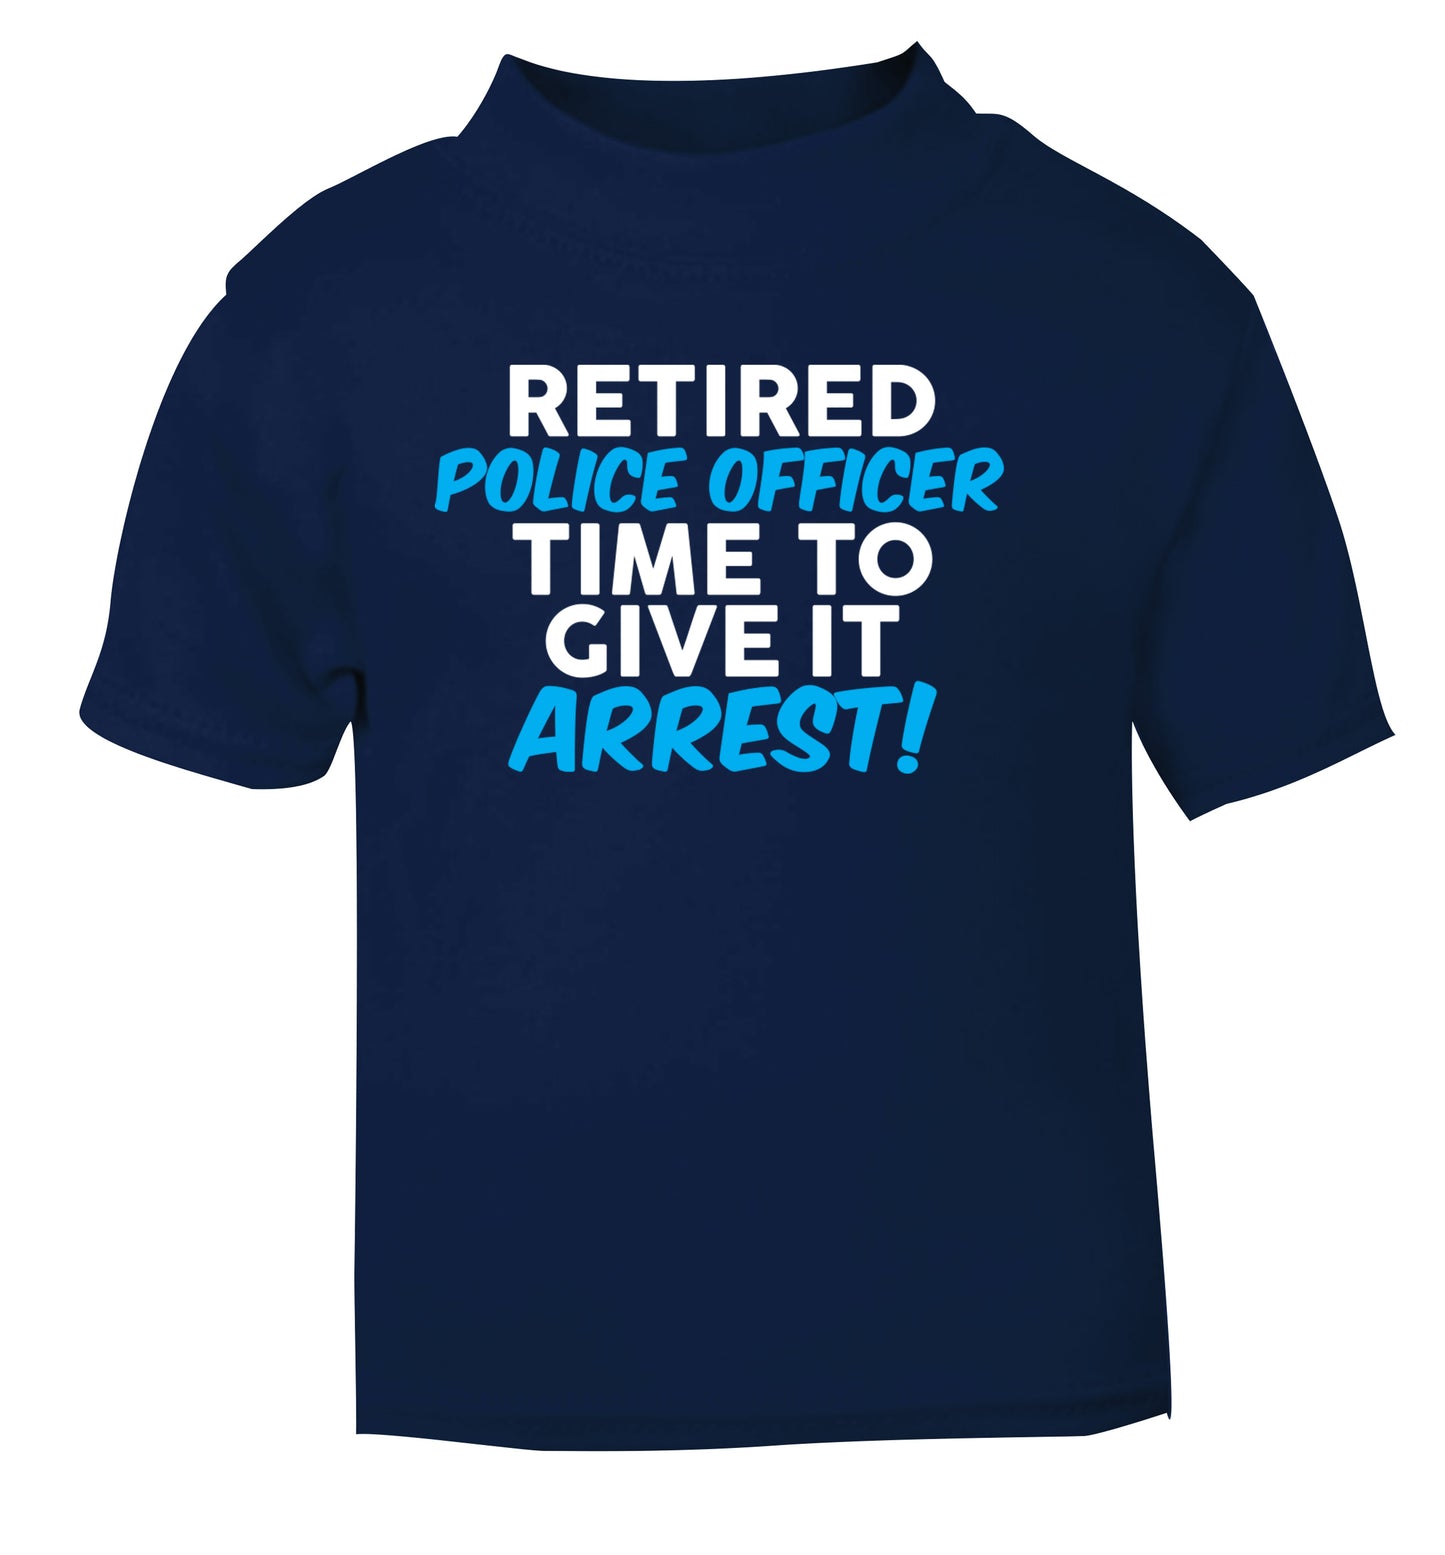 Retired police officer time to give it arrest navy Baby Toddler Tshirt 2 Years